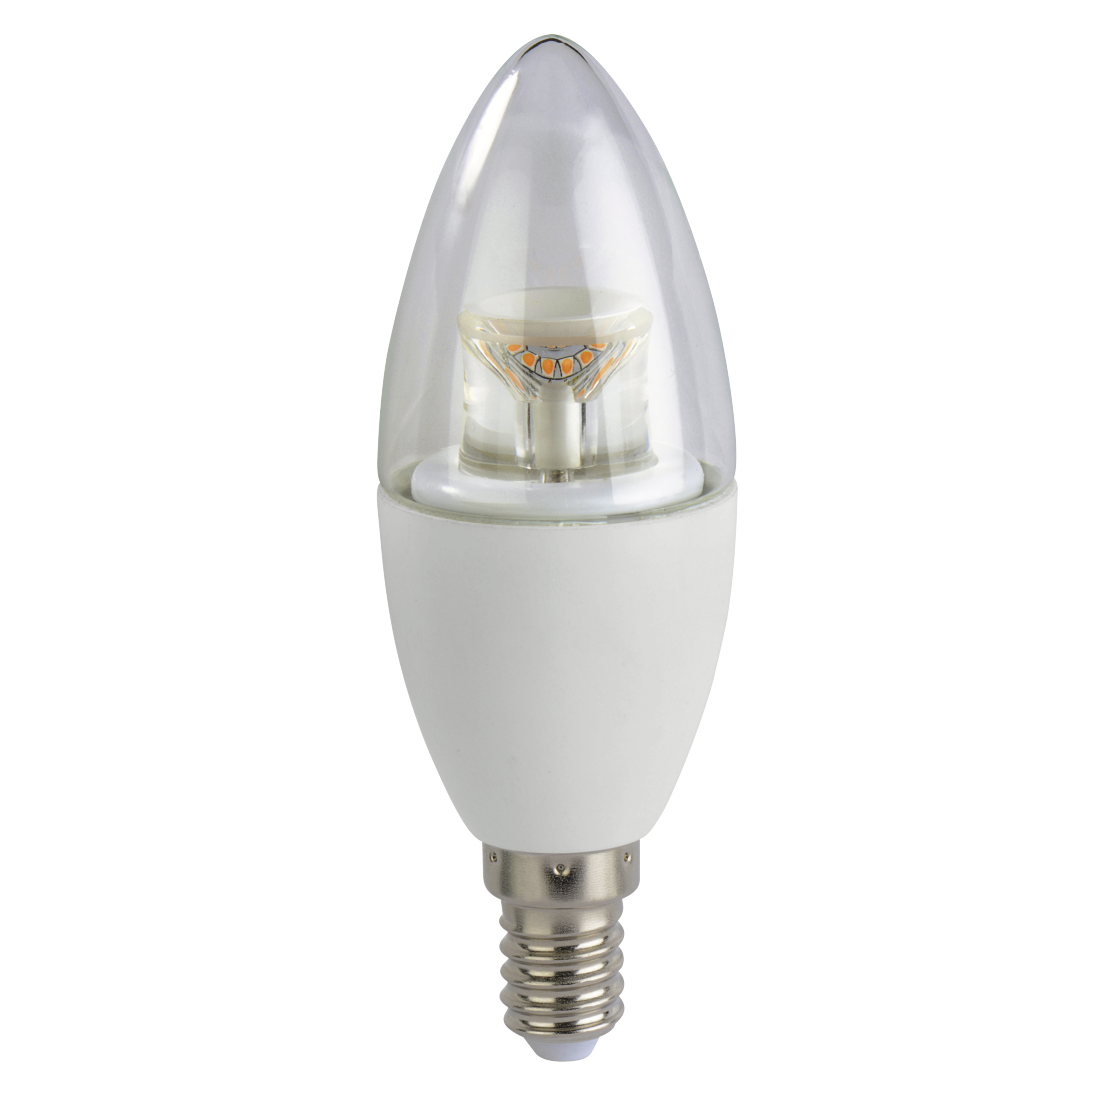 abx High-Res Image - Xavax, LED Bulb, E14, 470lm replaces 40W, candle bulb, warm white, dimmable